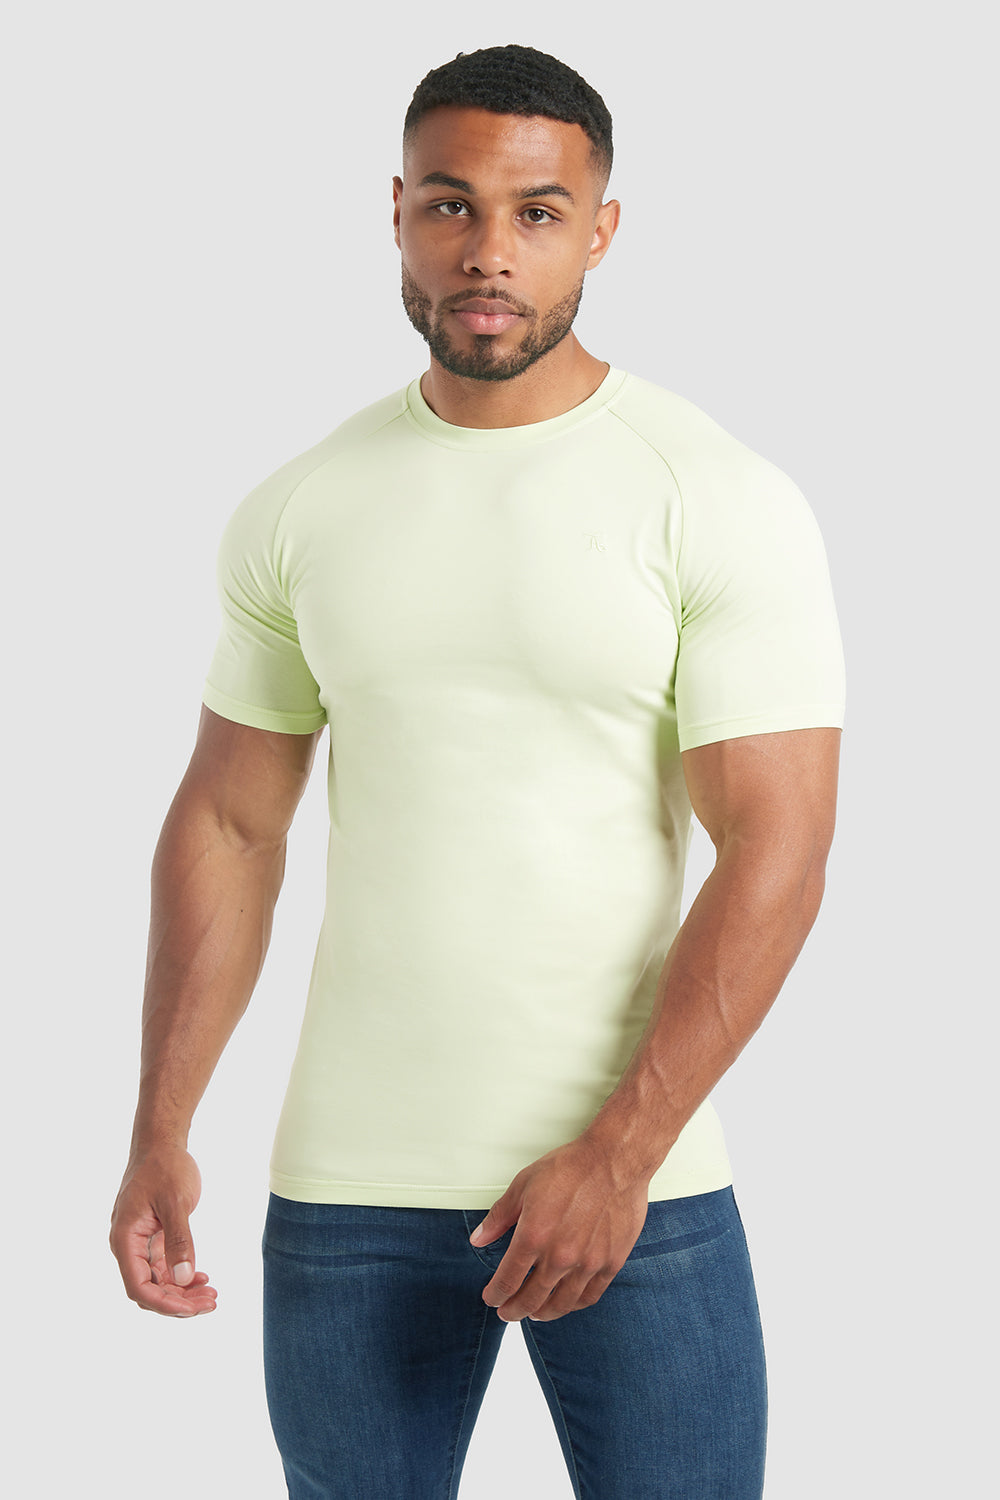 Muscle Fit T-Shirt in Lime Sorbet - TAILORED ATHLETE - ROW